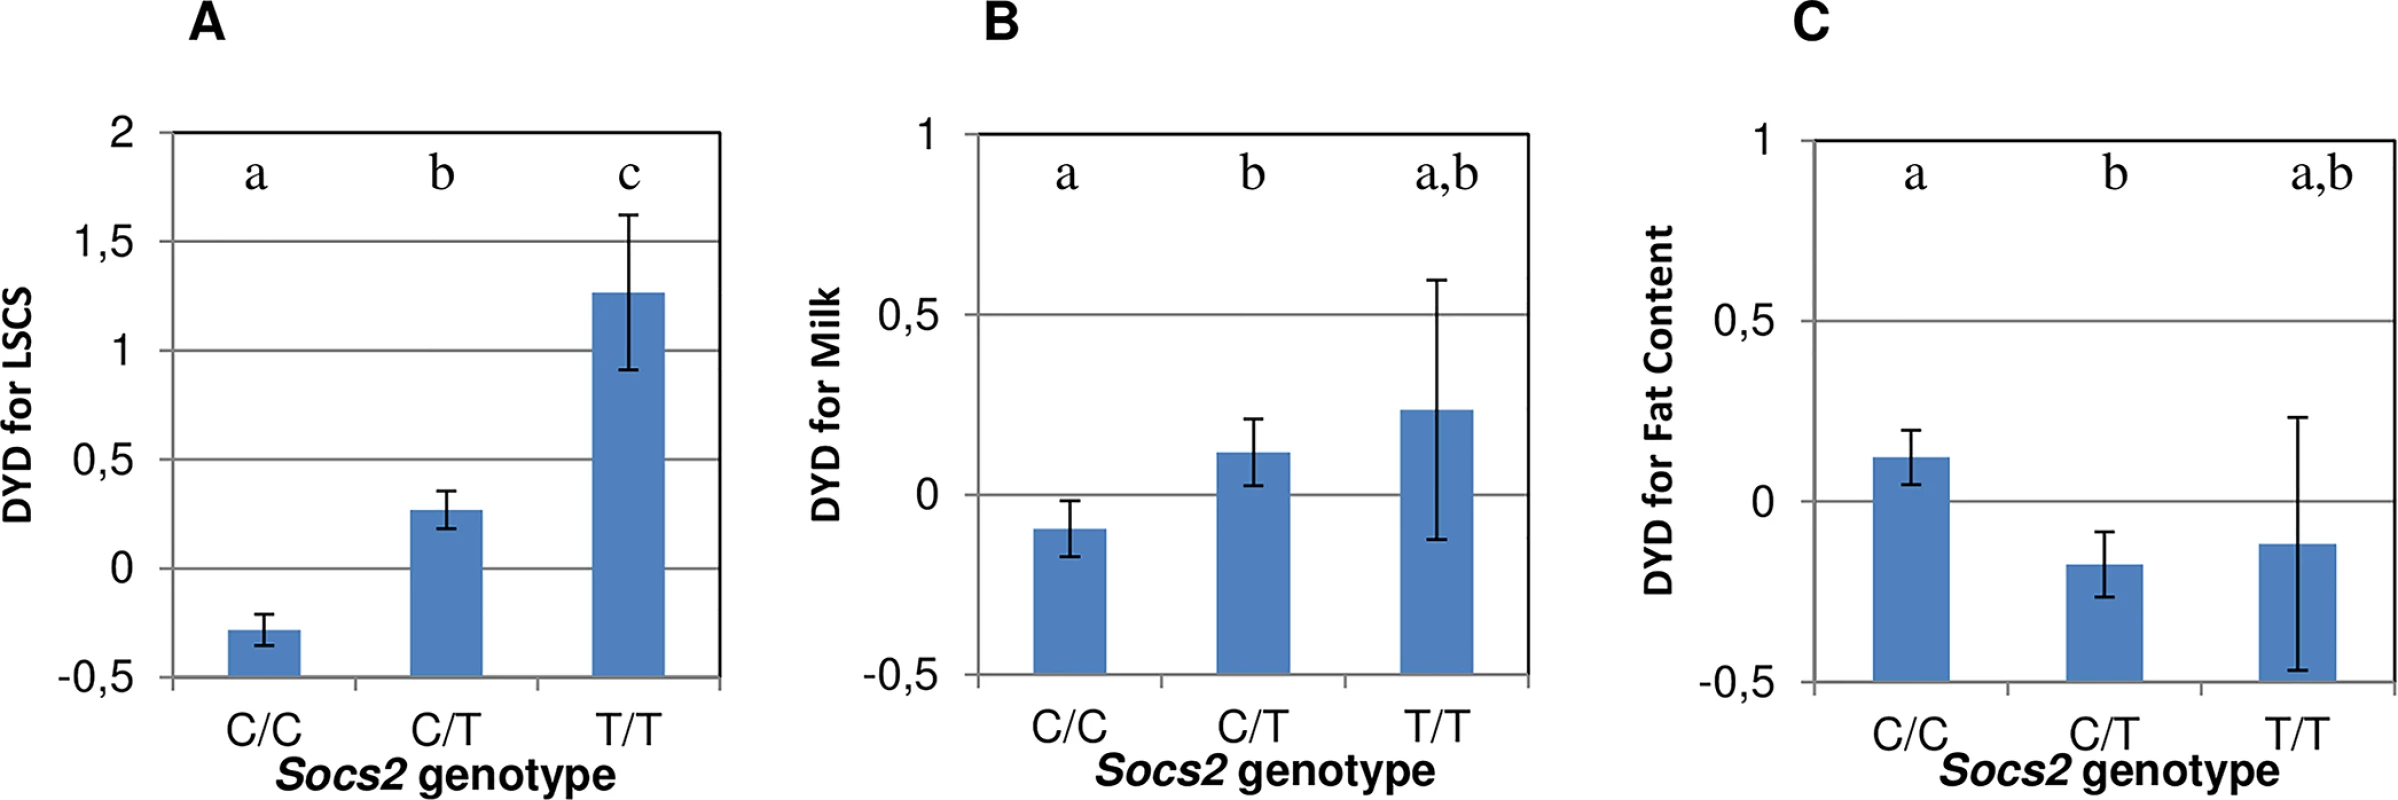 Effect of <i>Socs2</i> genotype on milk somatic cell counts (LSCS), Milk Yield and Fat Content in 468 rams.